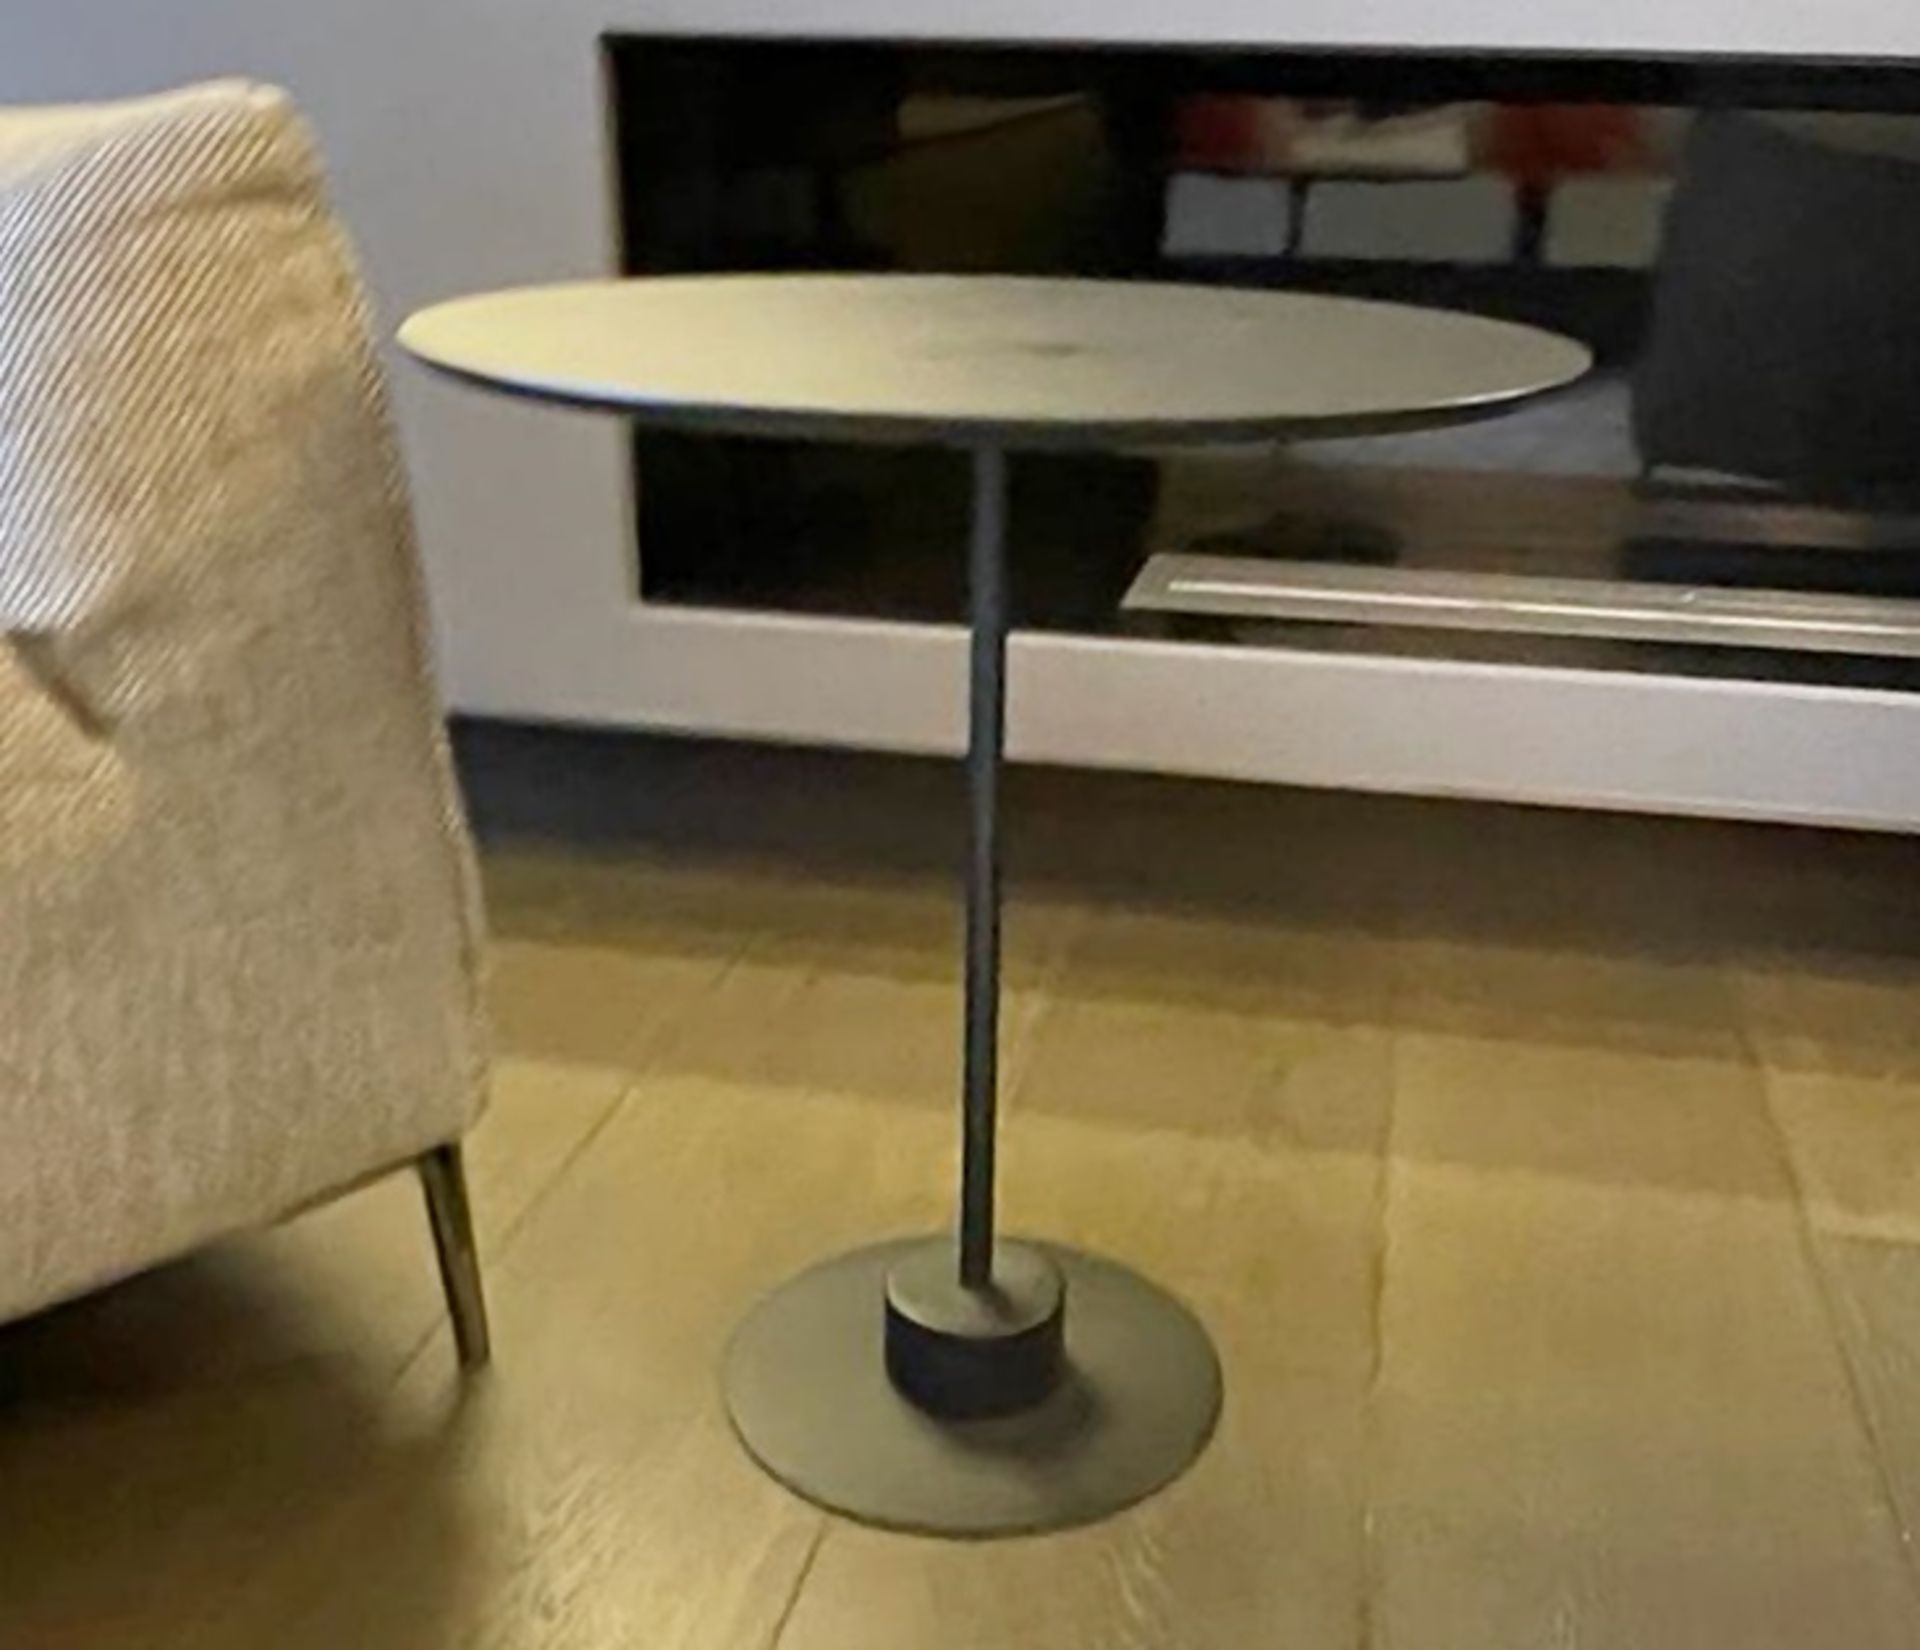 1 x Stylish Round Occasional Metal Table with a Bronzed Finish and Industrial Aesthetic - Image 4 of 4